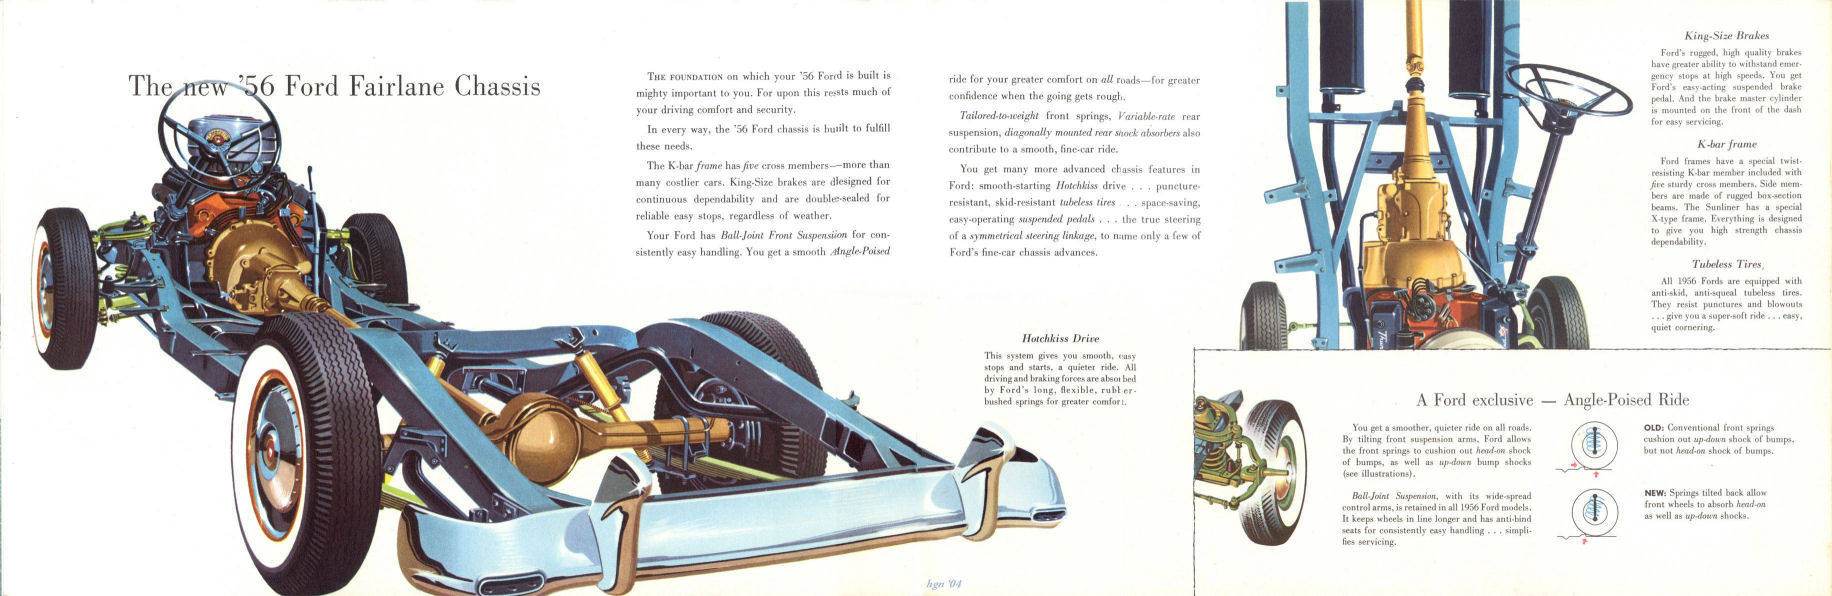 1956 Ford brochures